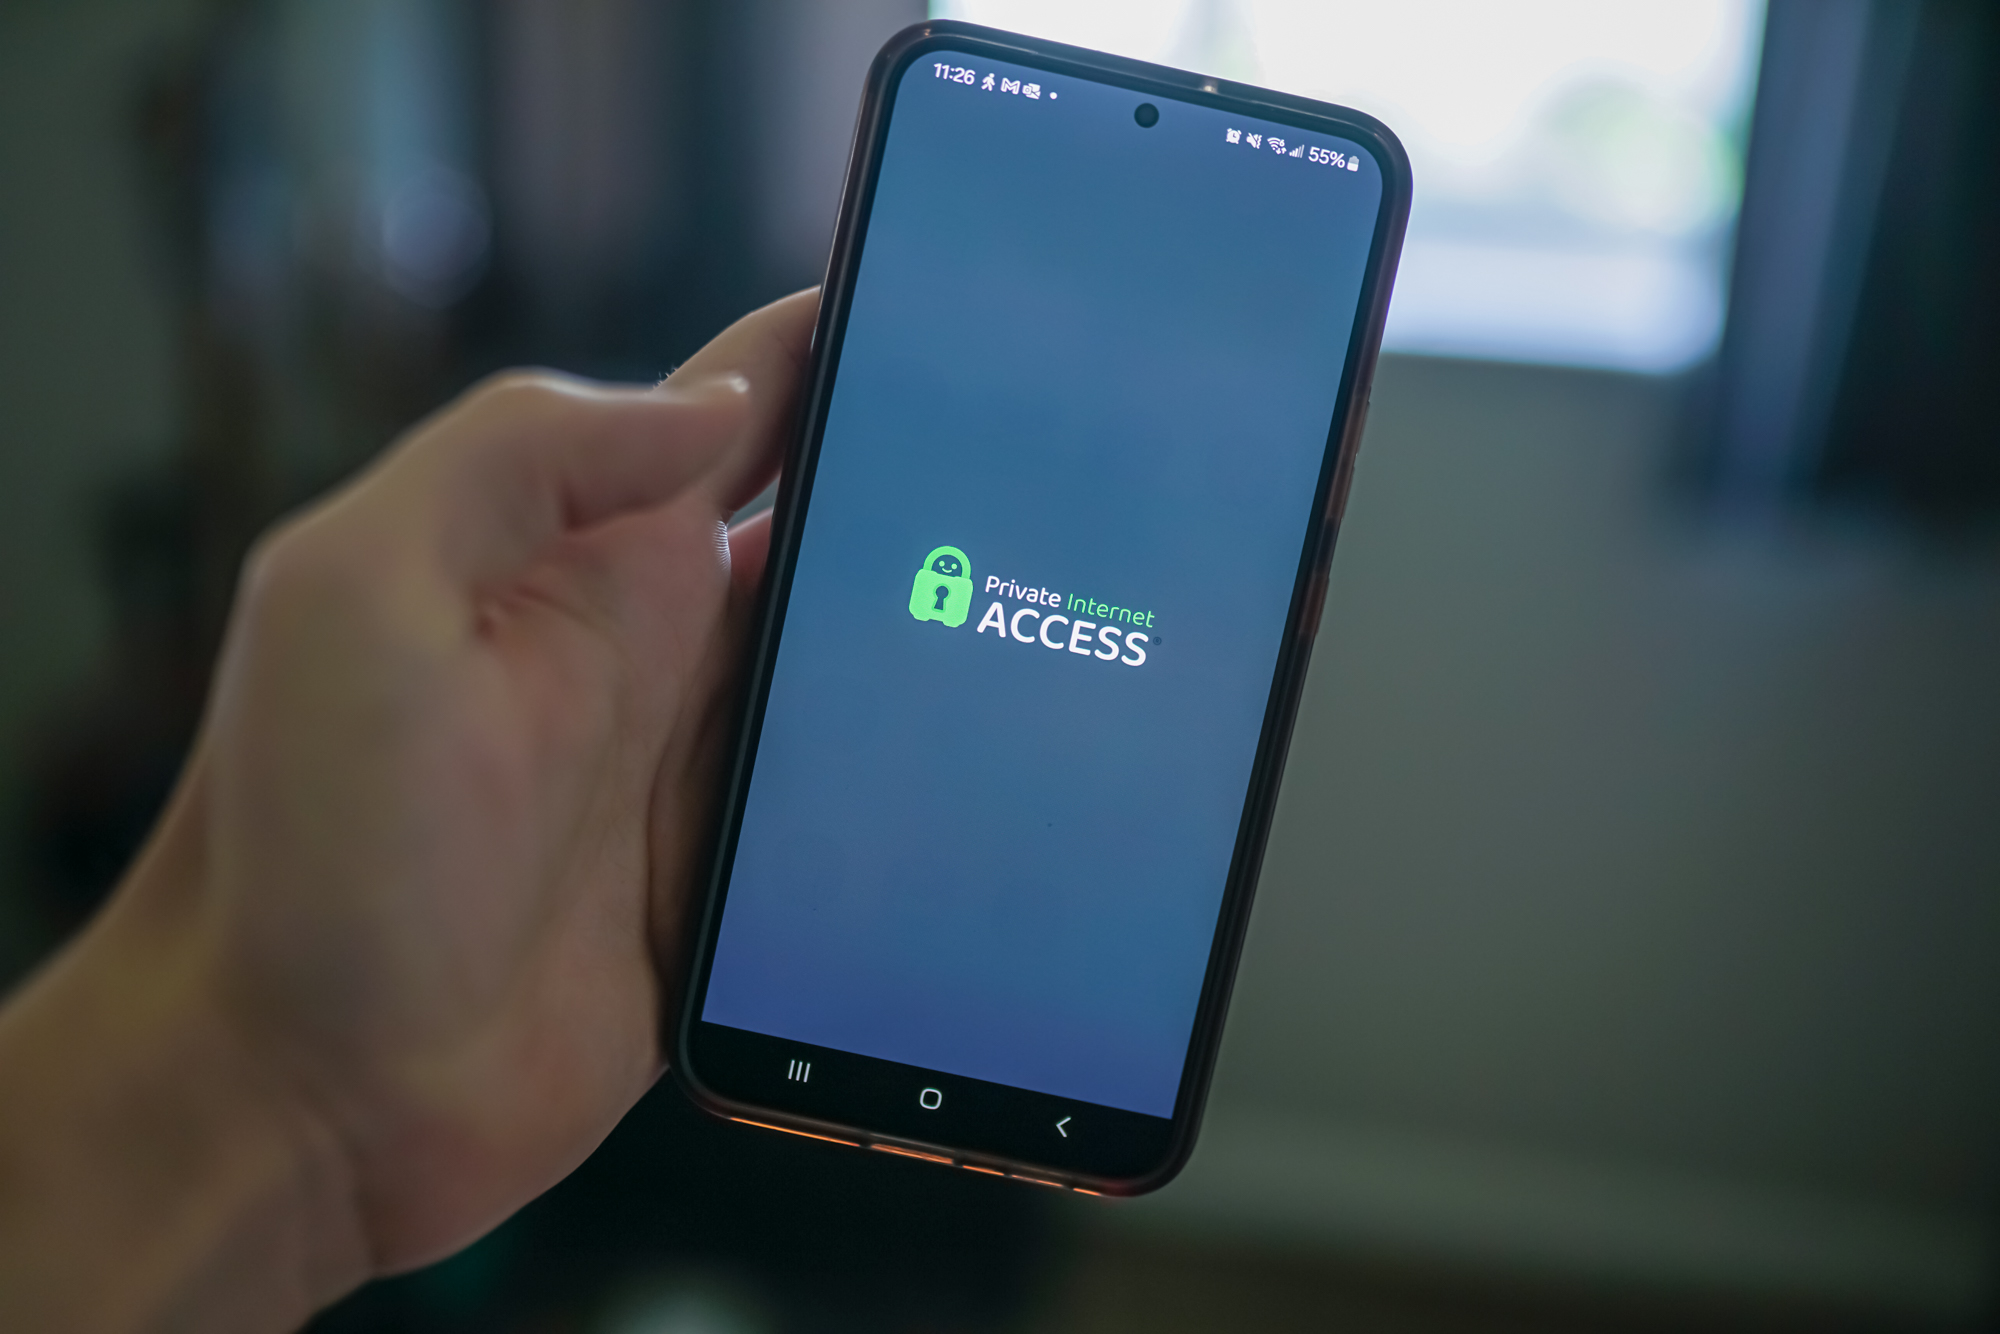 The Private Internet Access app running on an Android phone.